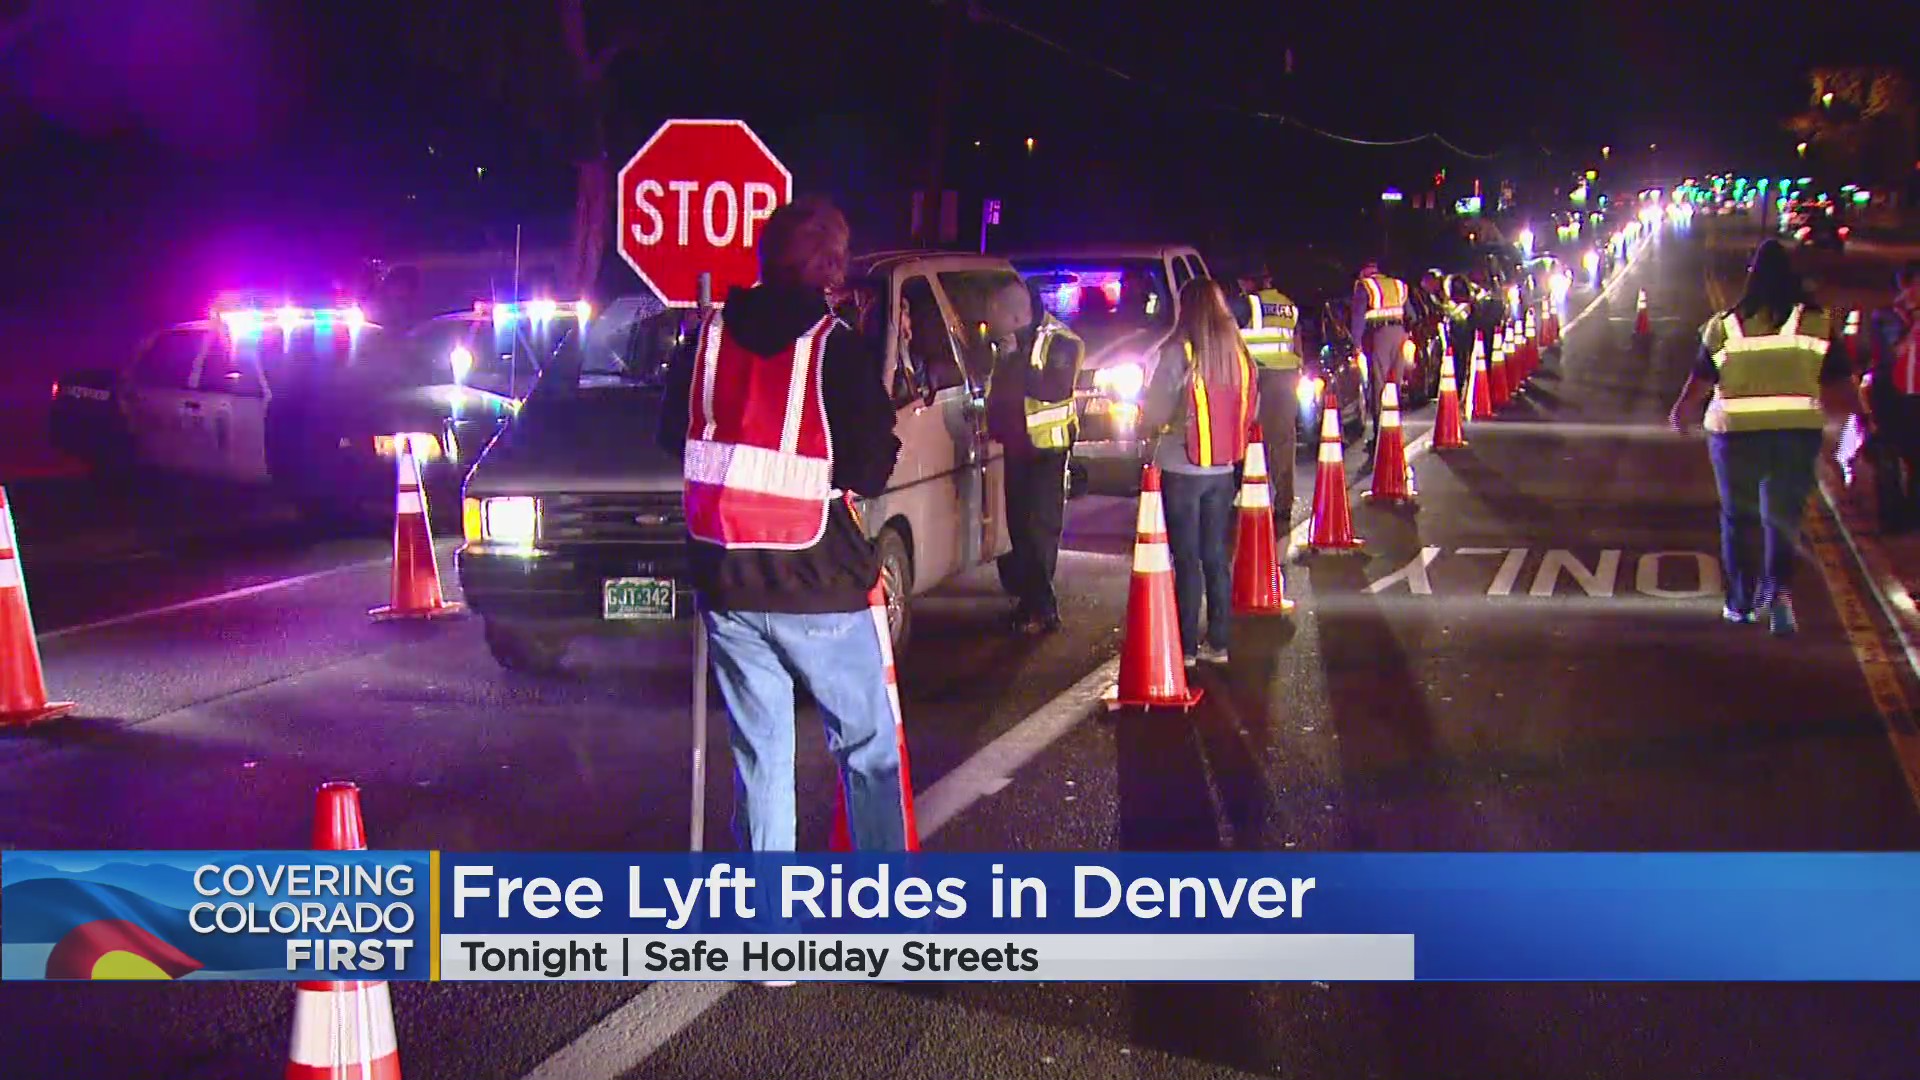 CDOT partners with Lyft to offer free rides during holidays